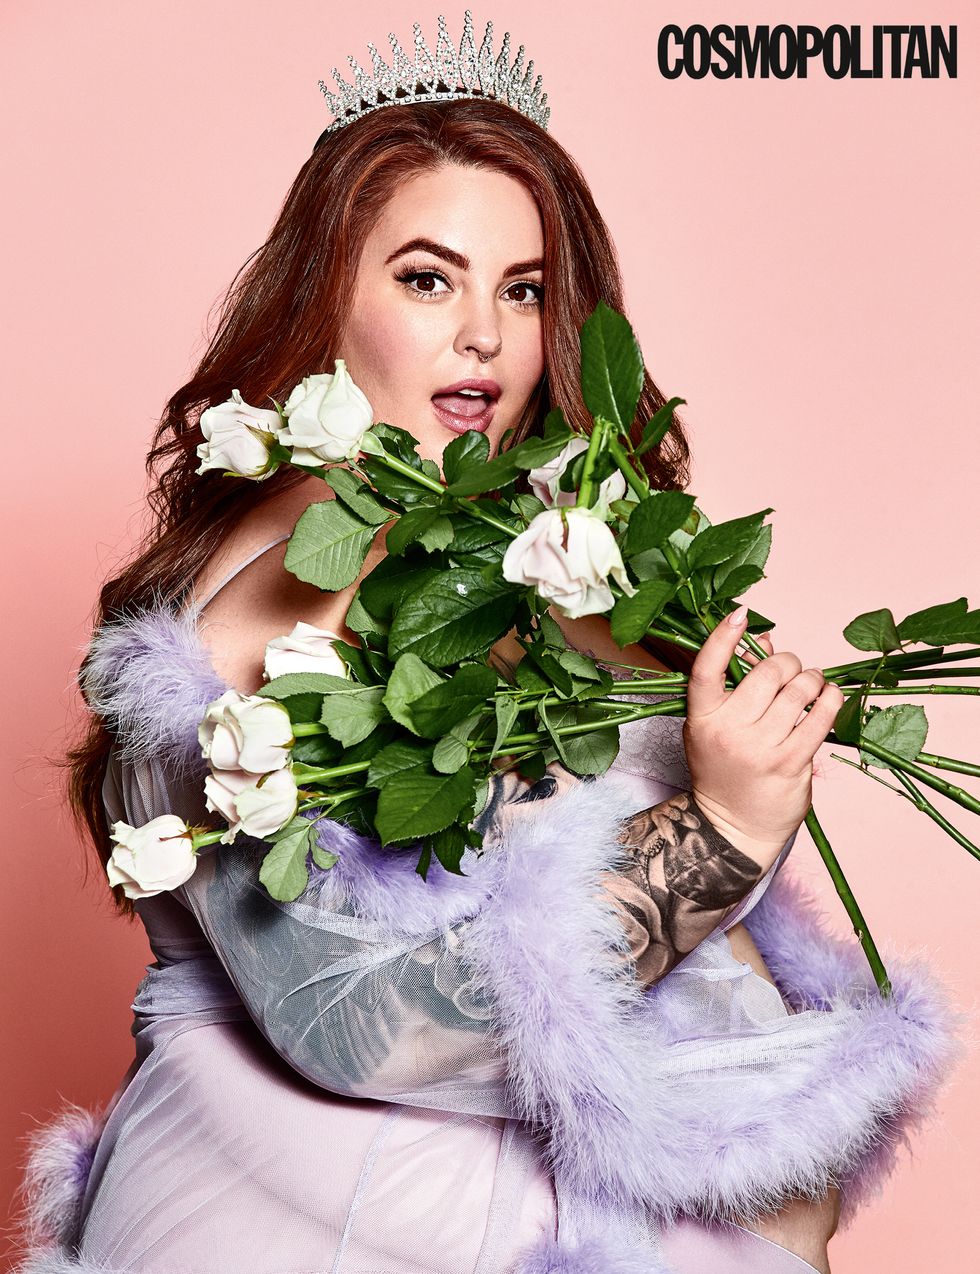 "I wish I could just disappear": Tess Holliday opens up about overcoming crippling mental health